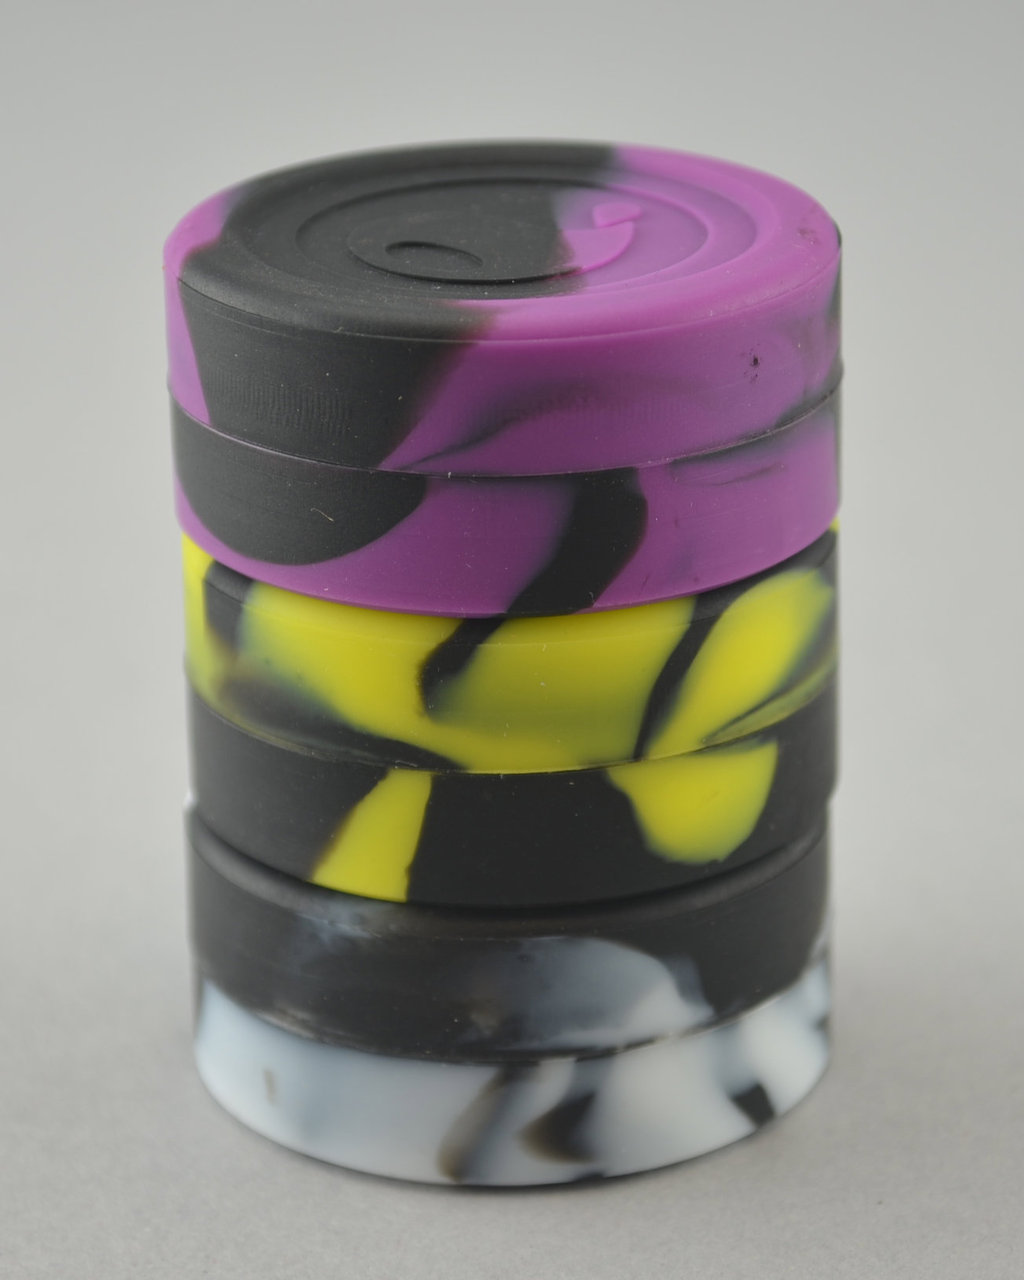 OEM 9ml Platinum Cured Silicone Oil Slick DAB Wax Container